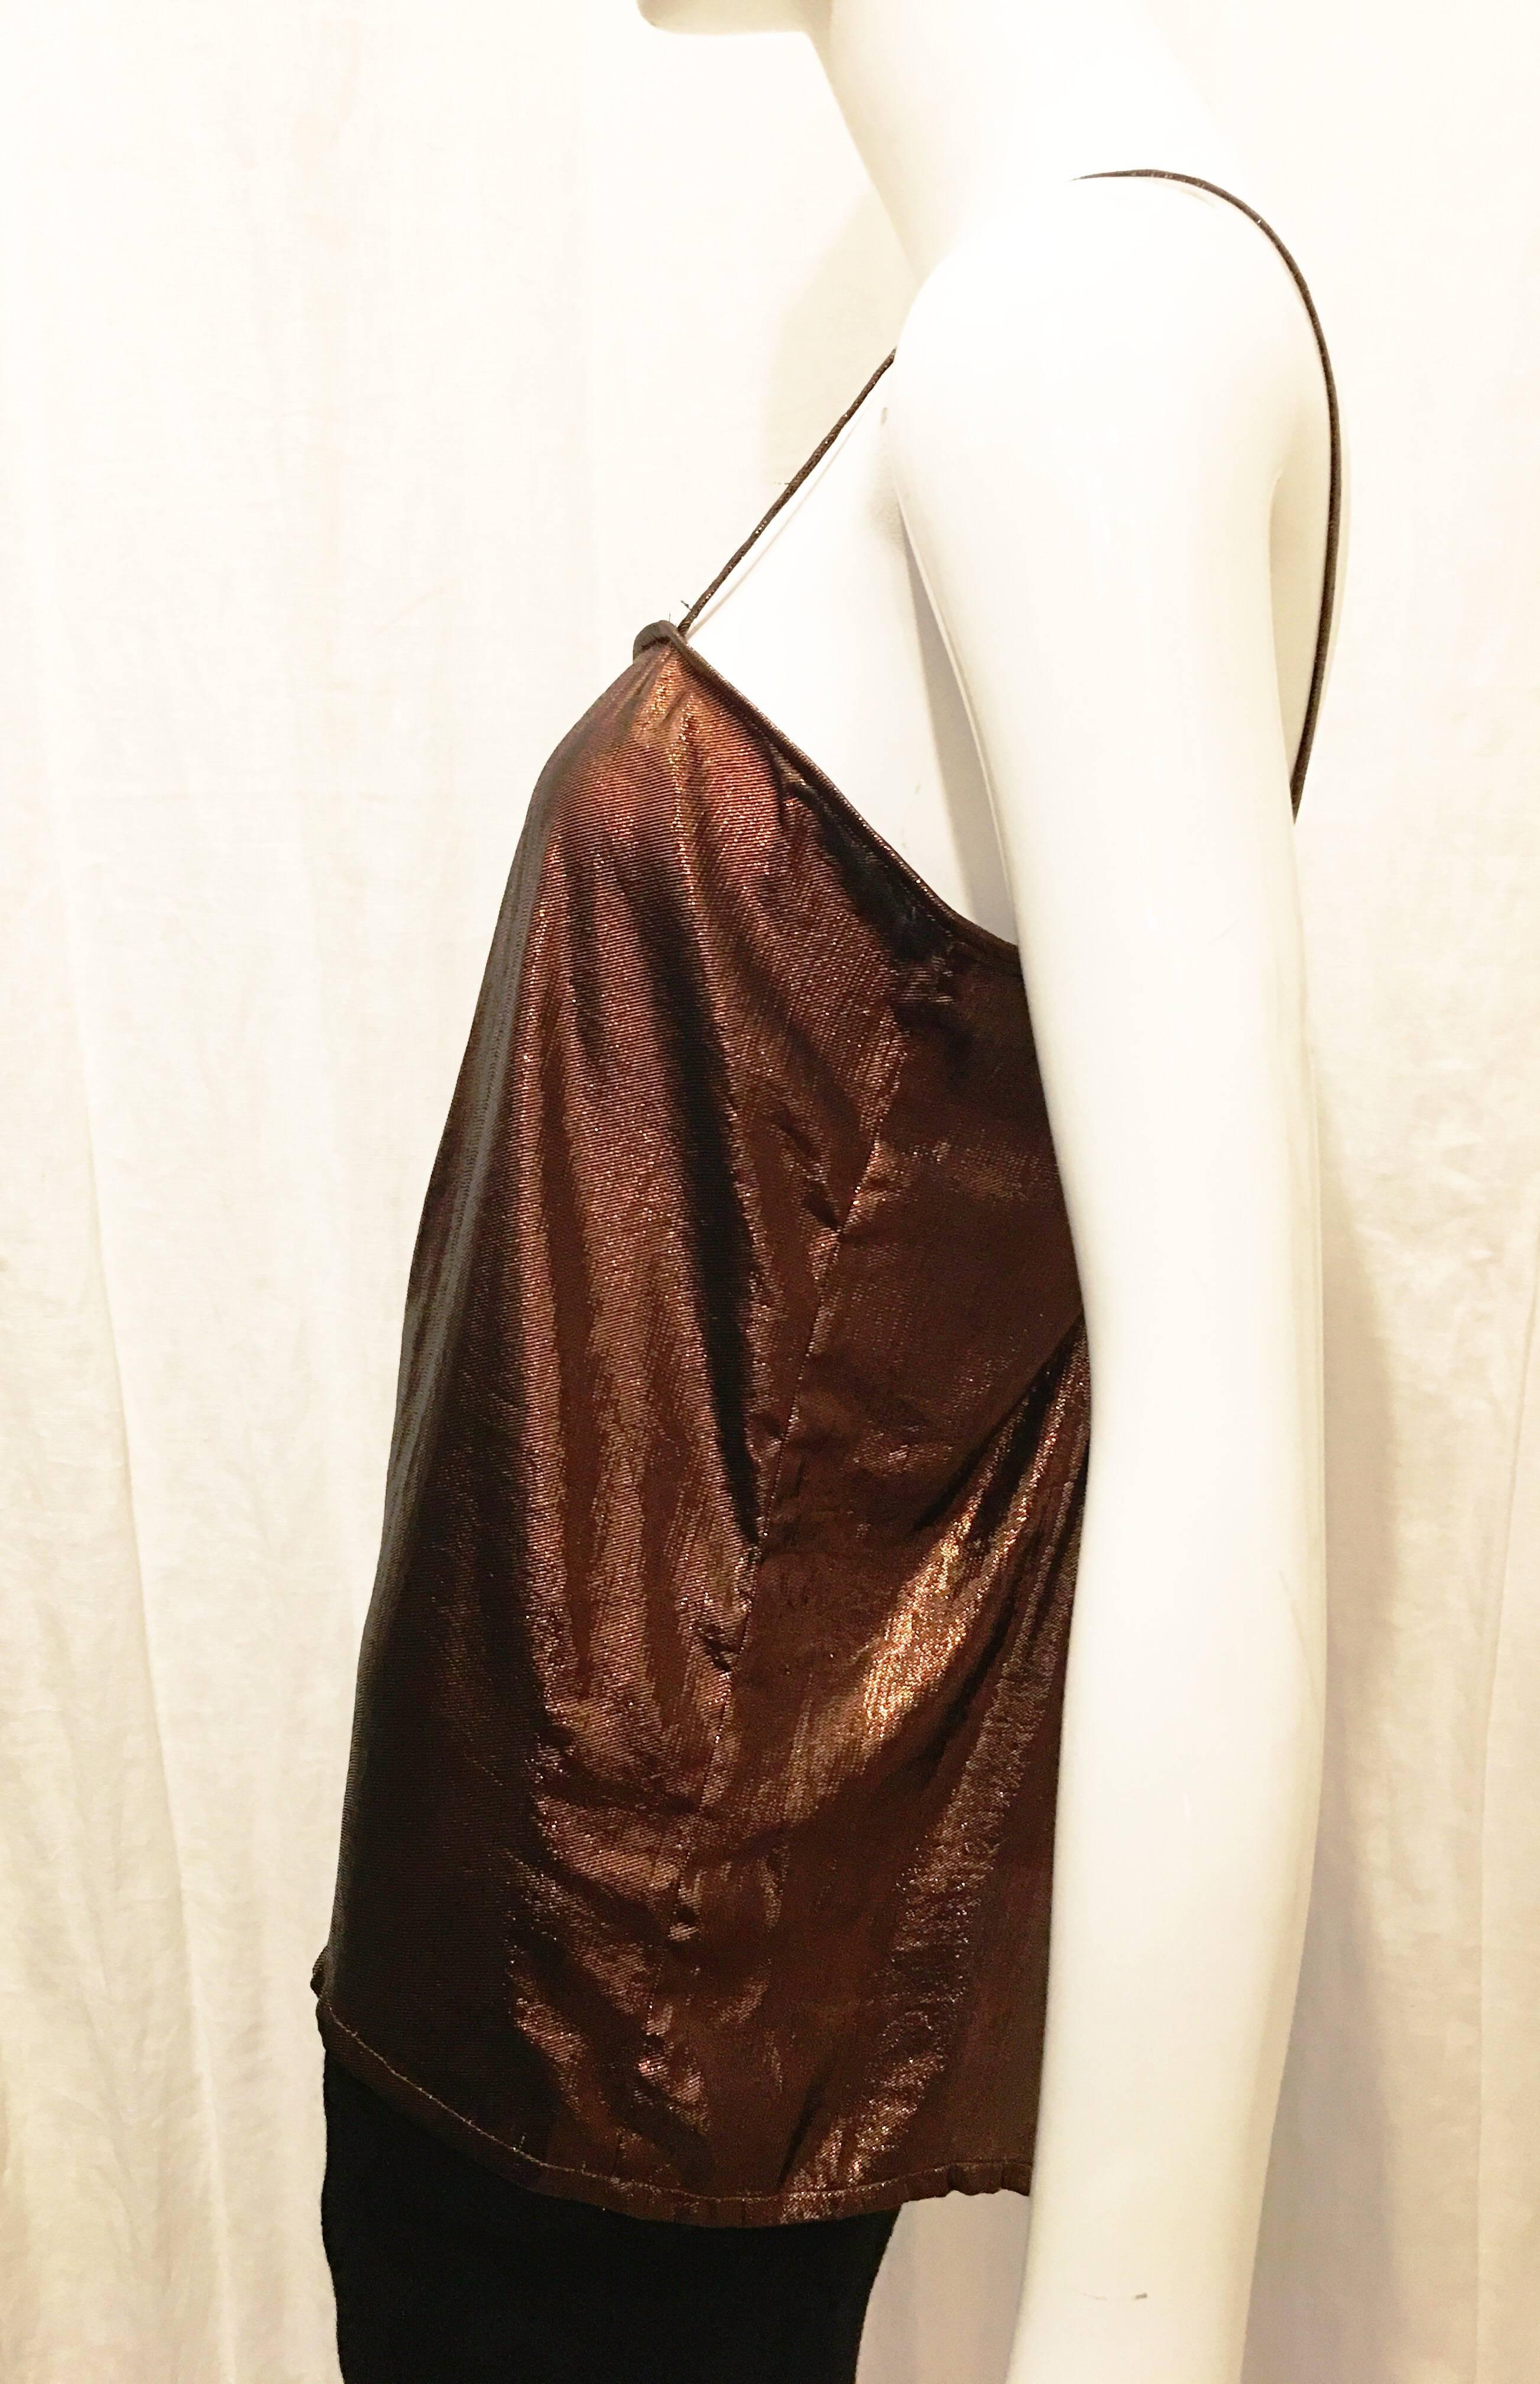 Bronze metallic spaghetti strap top with pleating at bust. Perfect layering piece. Wear with ankle length black slacks and a blazer for cocktail attire or with a mini skirt and heels for a night on the town. Beautiful warm tones in the light. 